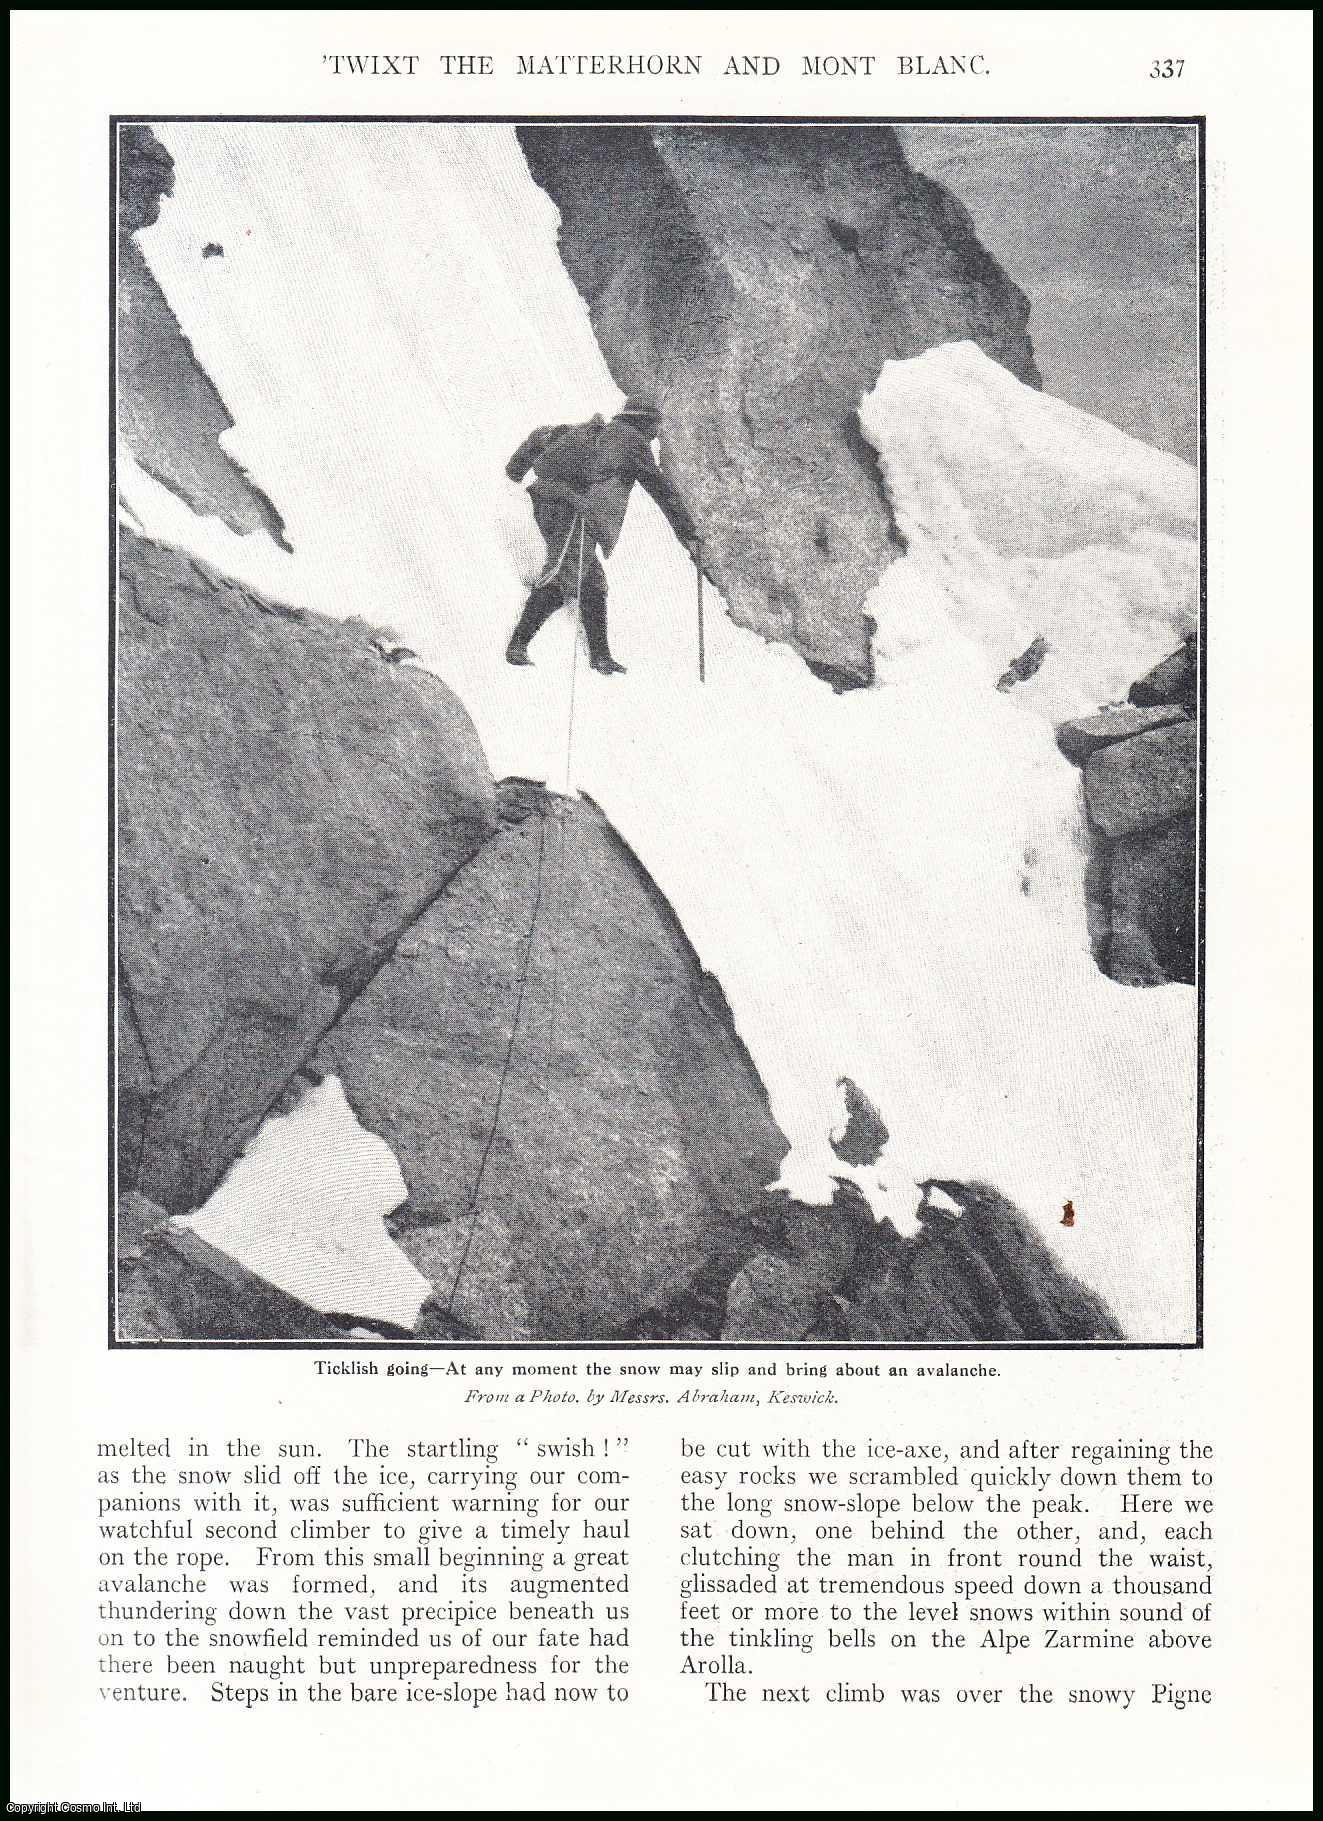 George D. Abraham - Twixt The Matterhorn and Mont Blanc. Some Guidless Climbing Adventures. An uncommon original article from the Wide World Magazine, 1913.